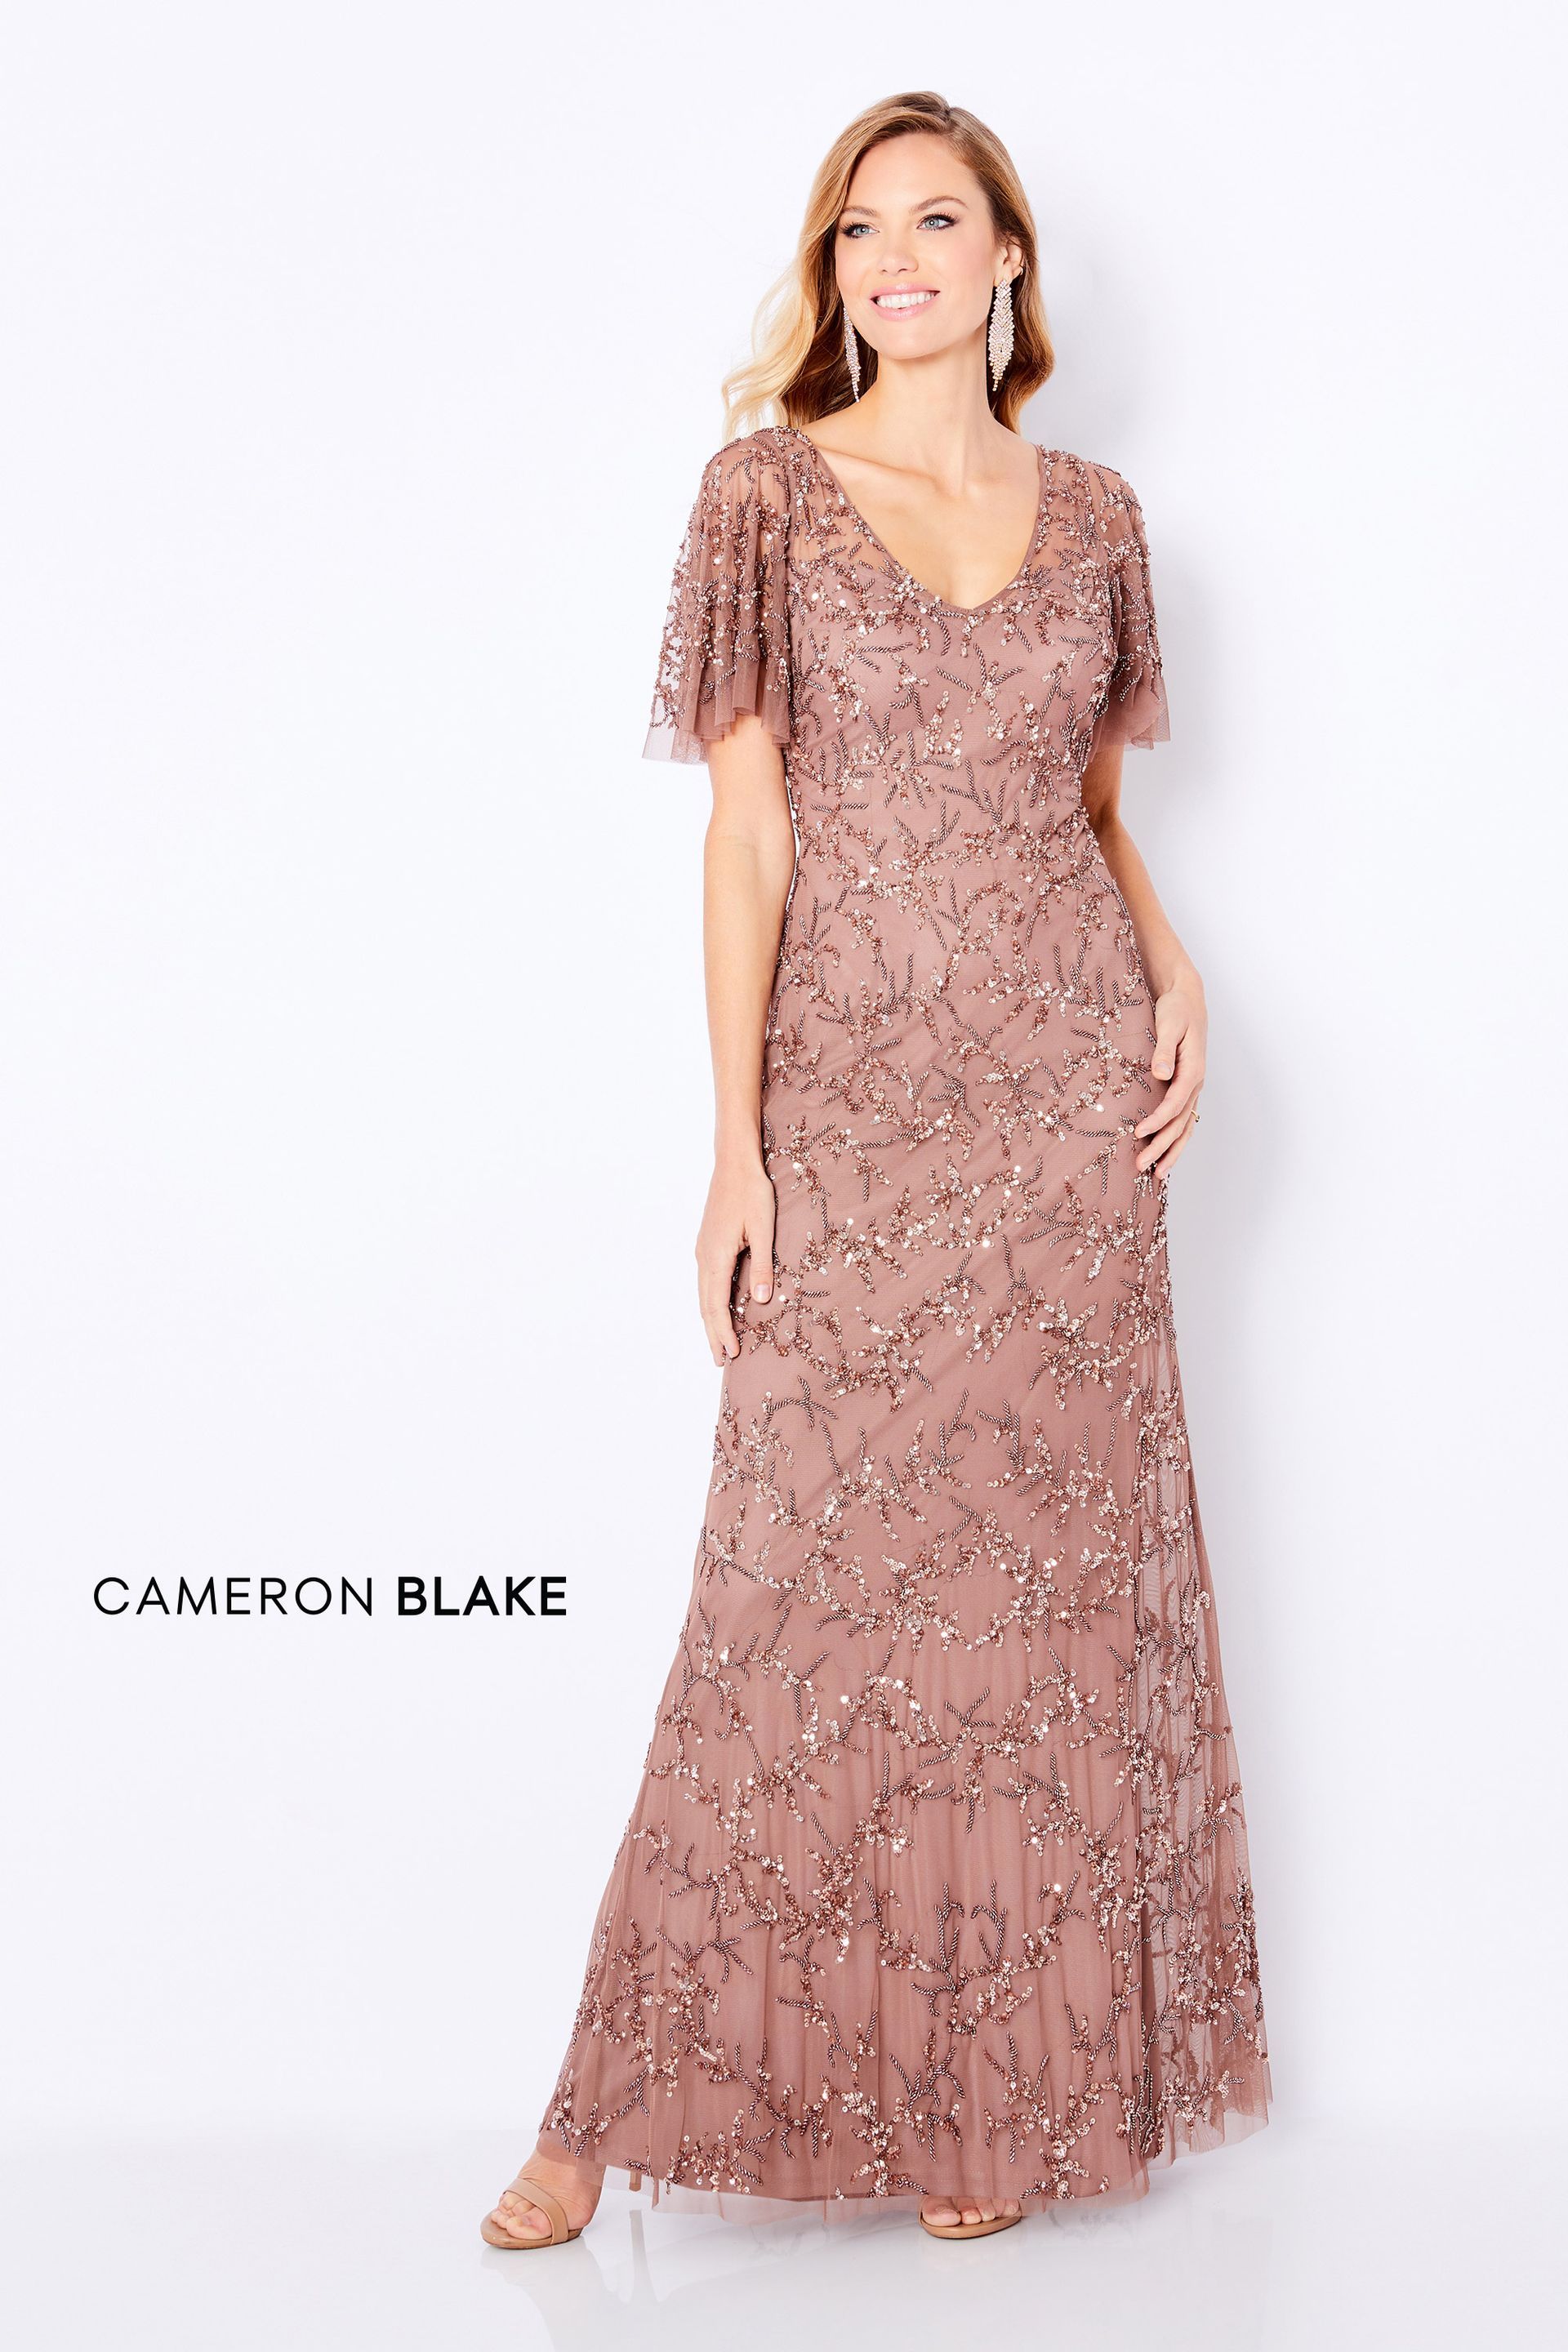 Cameron Blake Mother of the Bride Dress 226161 in Bronze at Fifi's Bridal in Elmhurst, IL